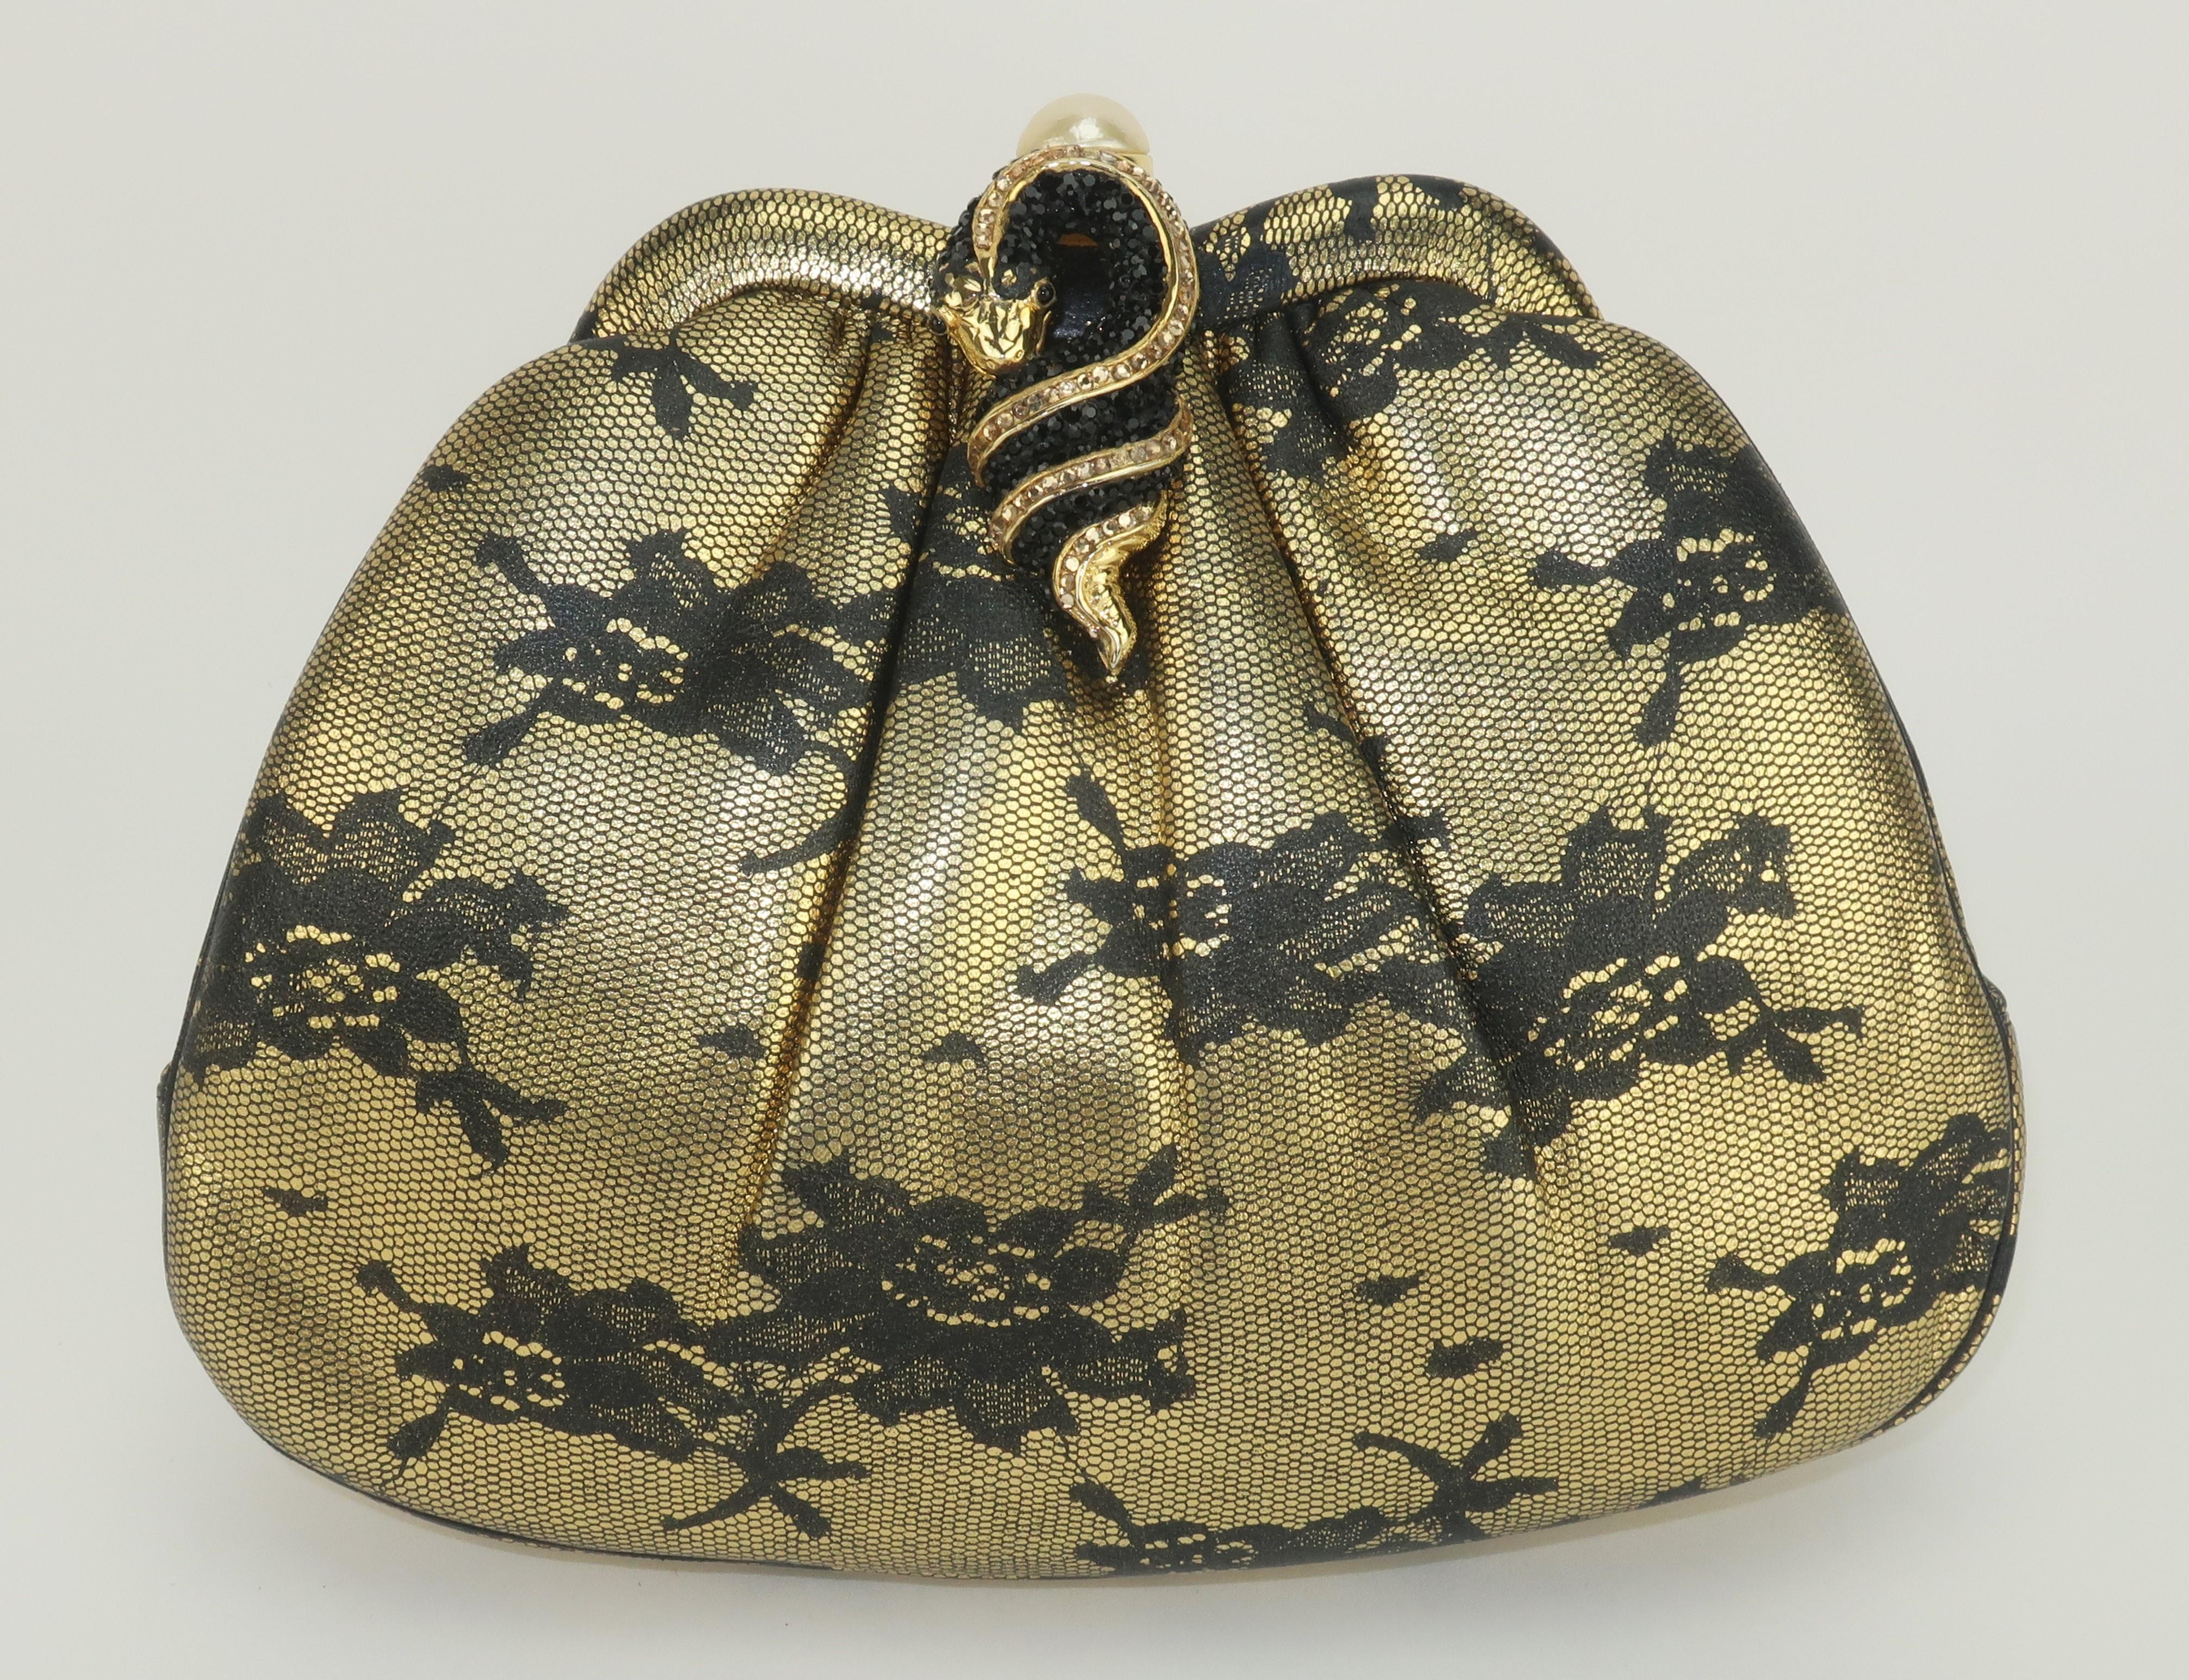 Vintage Judith Leiber evening handbag in an unusual black lace printed gold leather with a push button pearl closure embellished by a coiled pave crystal snake.  The closure opens to reveal a satin lined interior with two open side pockets and a